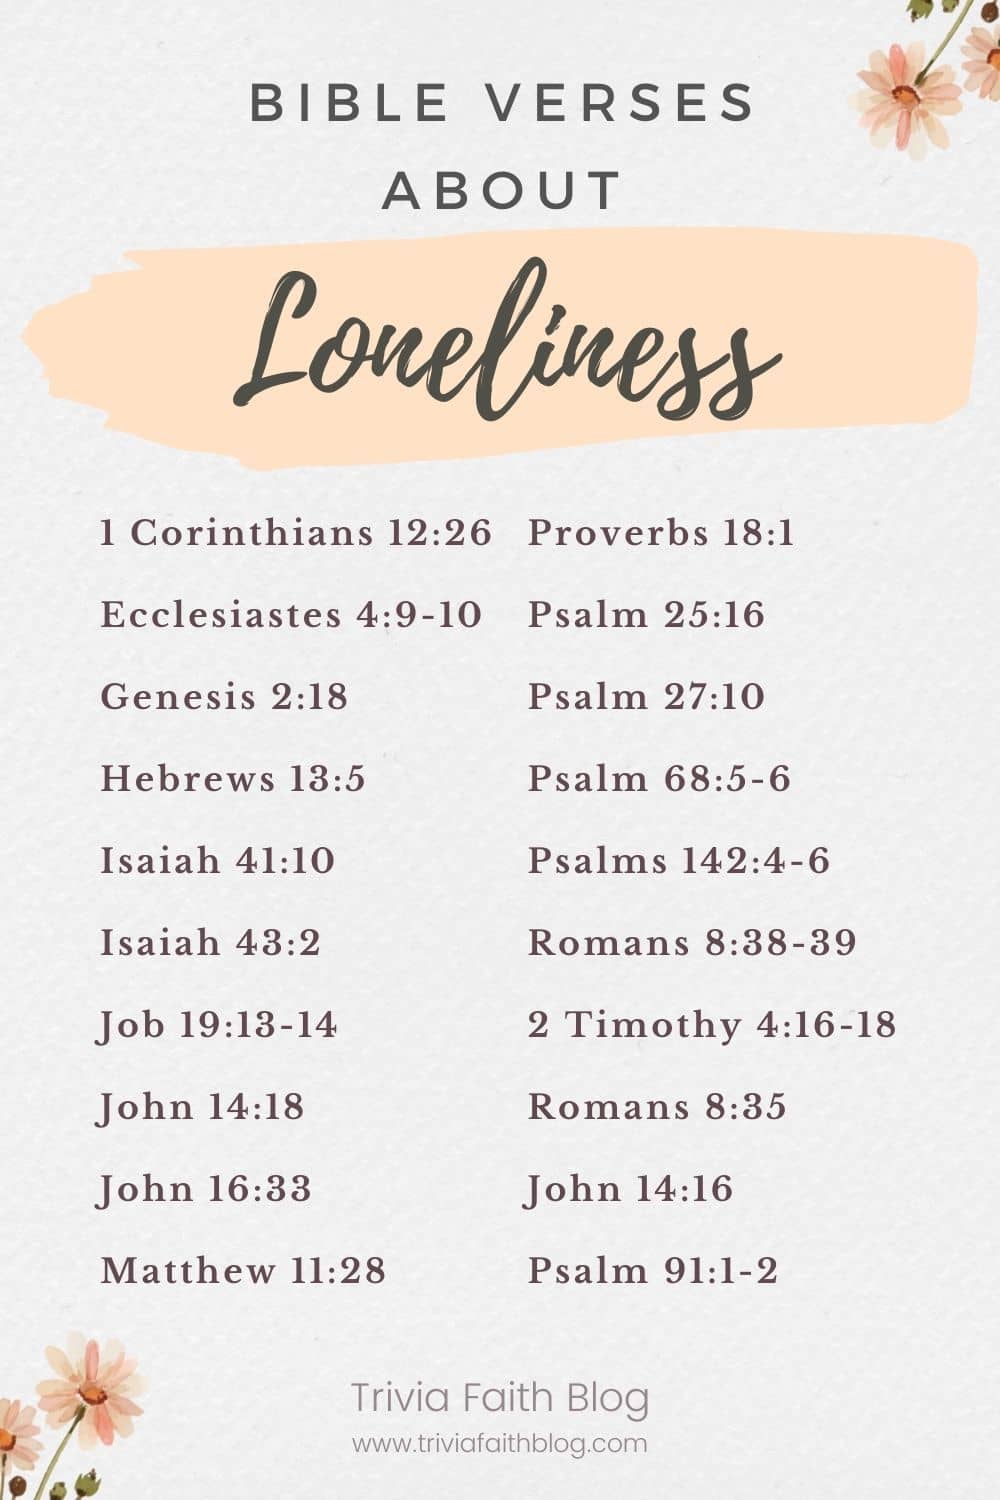 Bible verses about loneliness